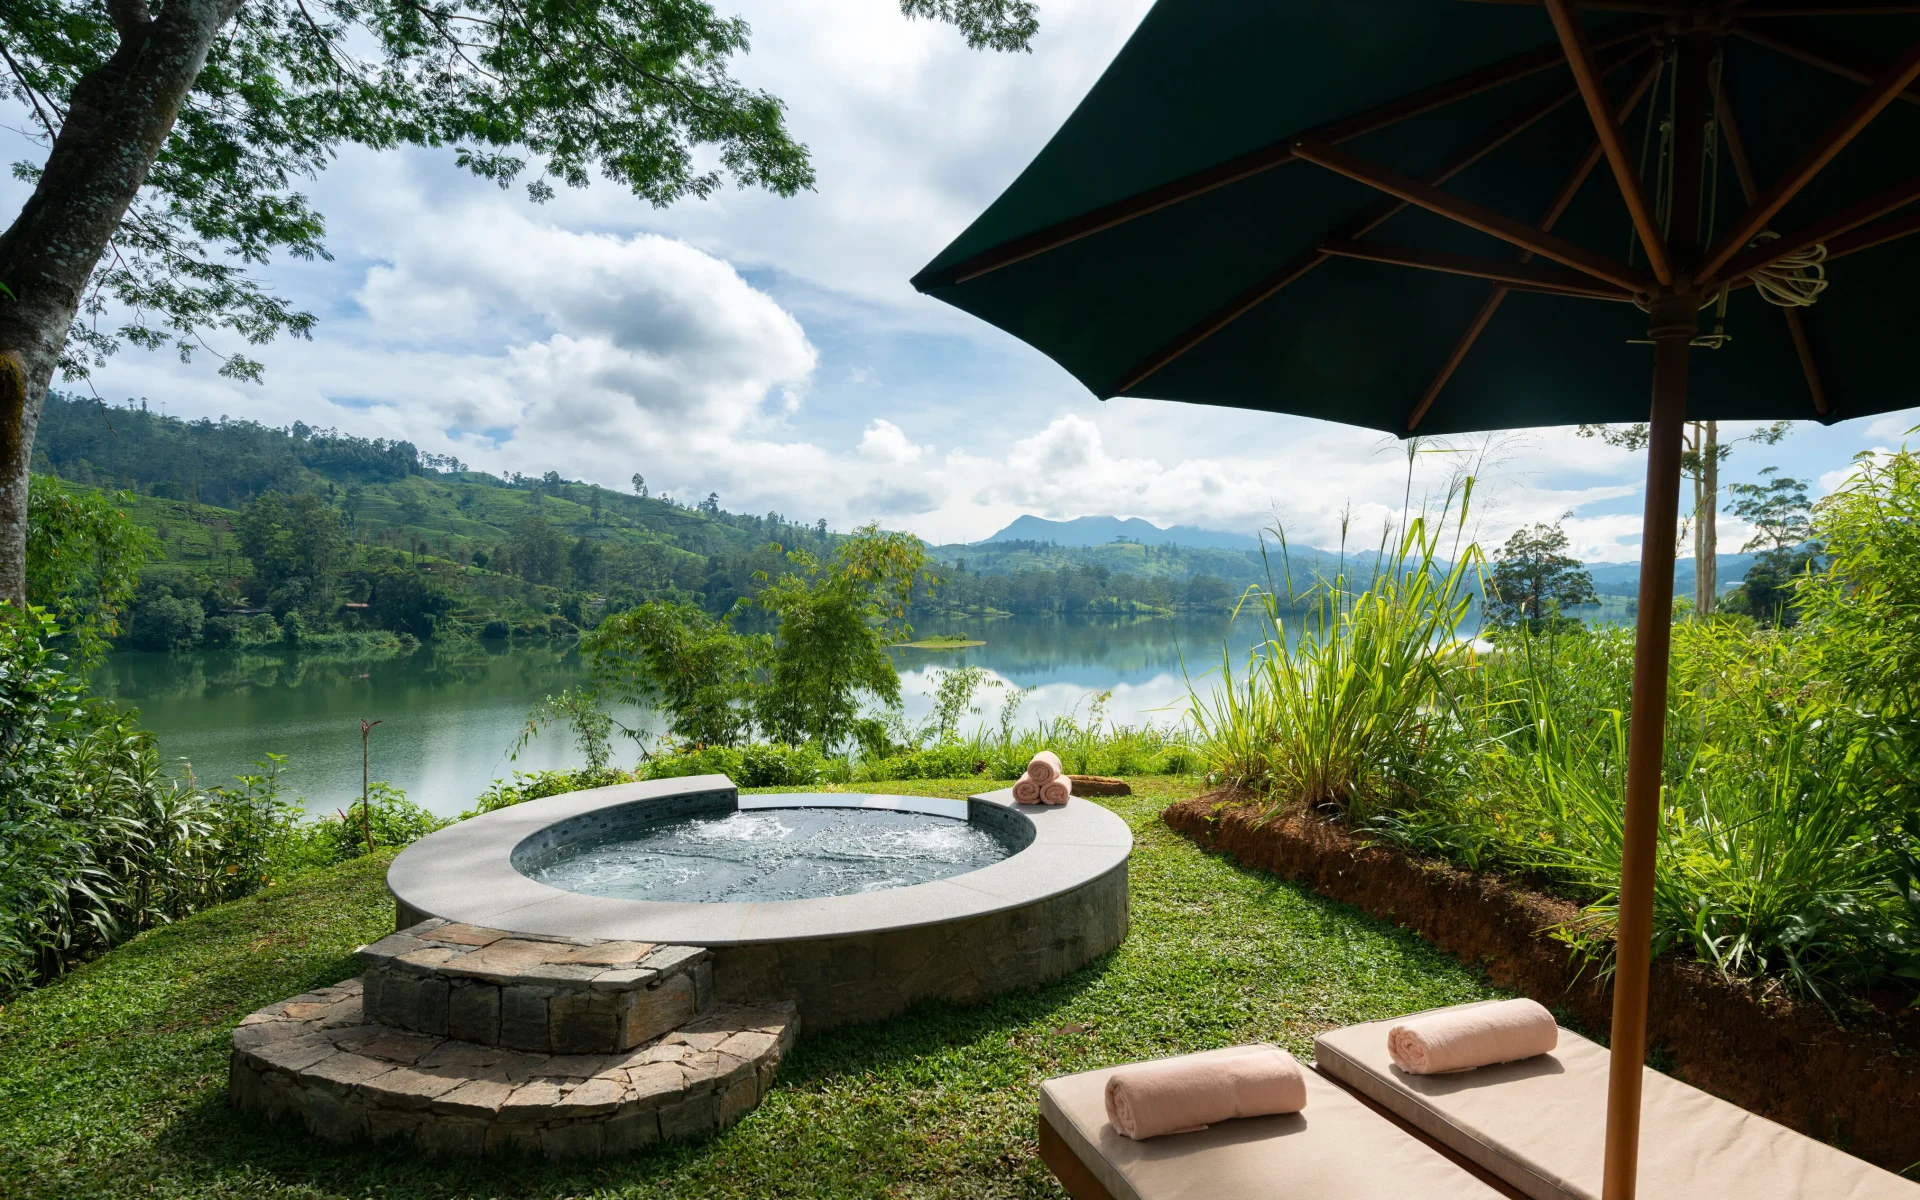 The jacuzzi at Castlereagh overlooks a stunning panorama of the lake.